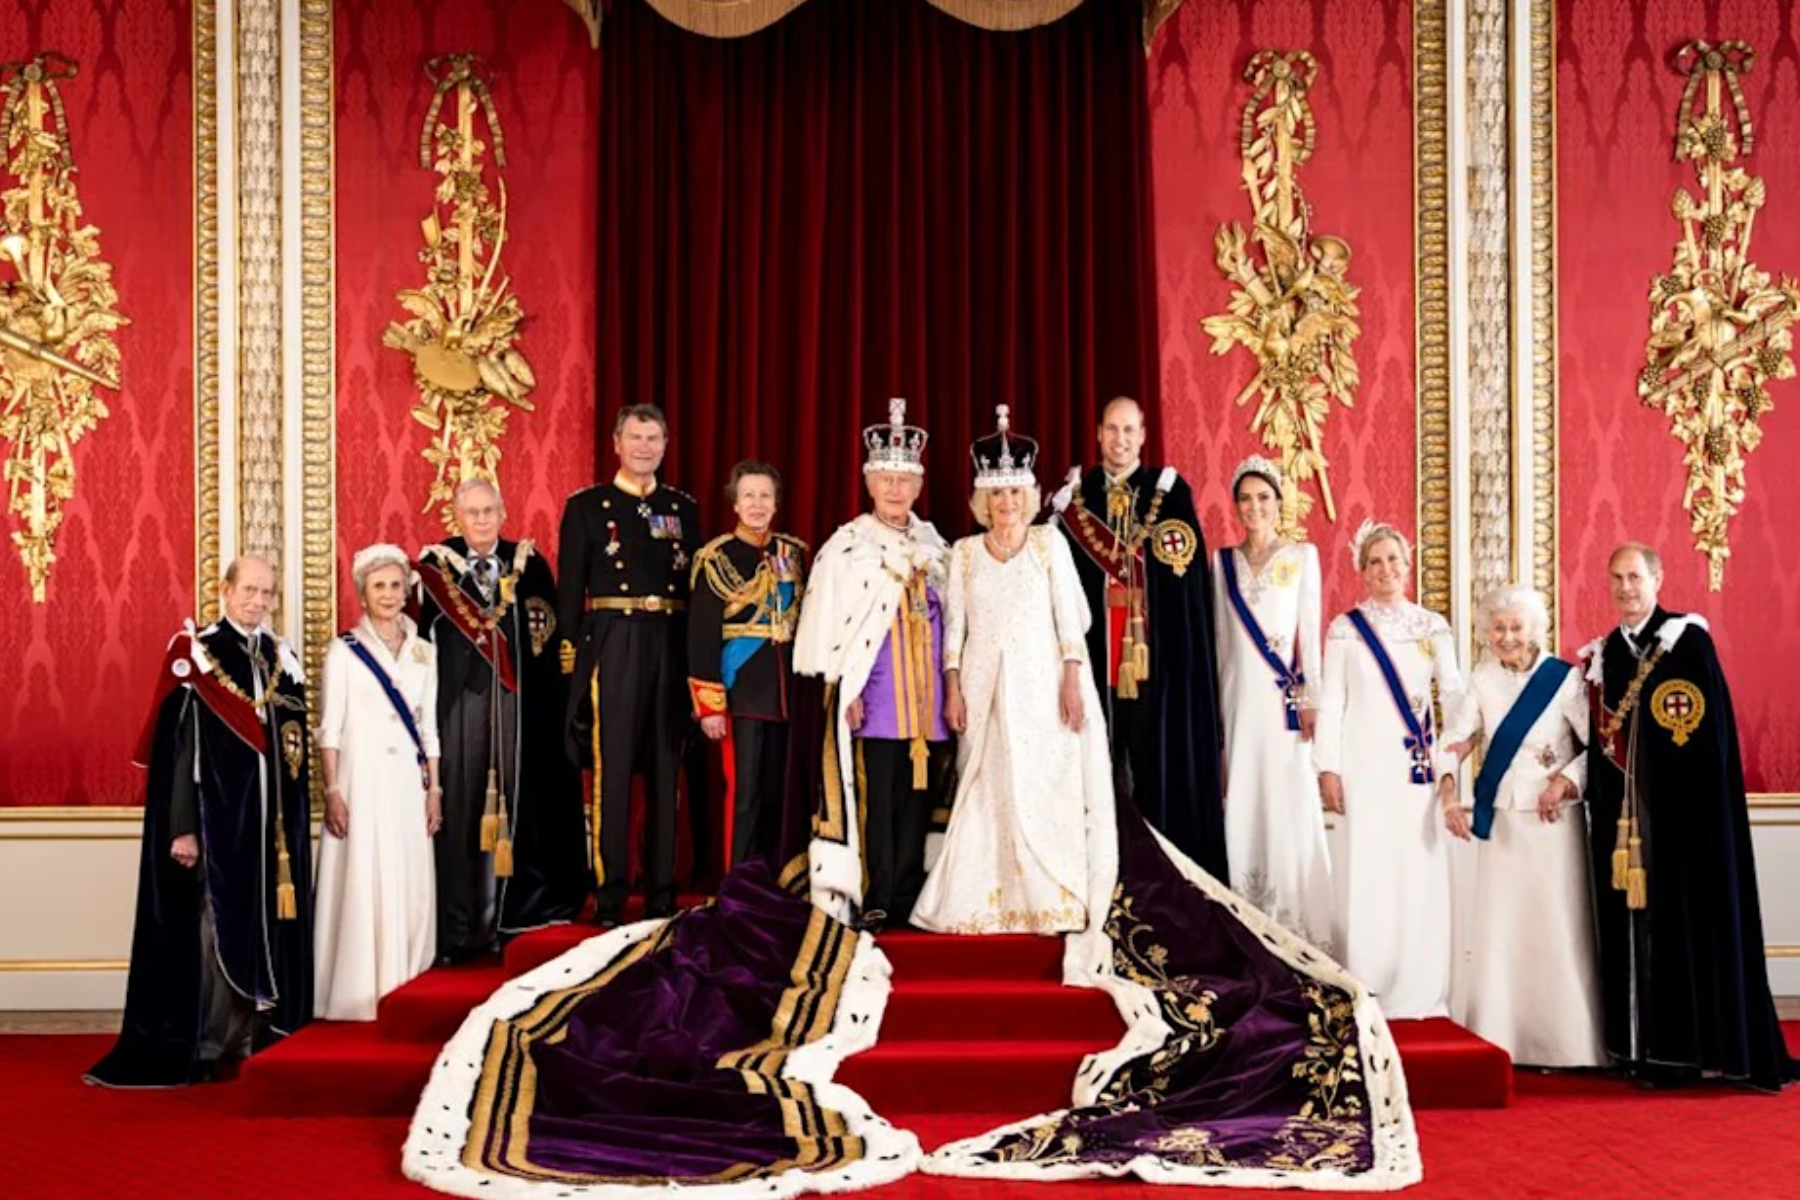 King Charles and Queen Camilla are pictured with working members of the royal family in the fourth official portrait